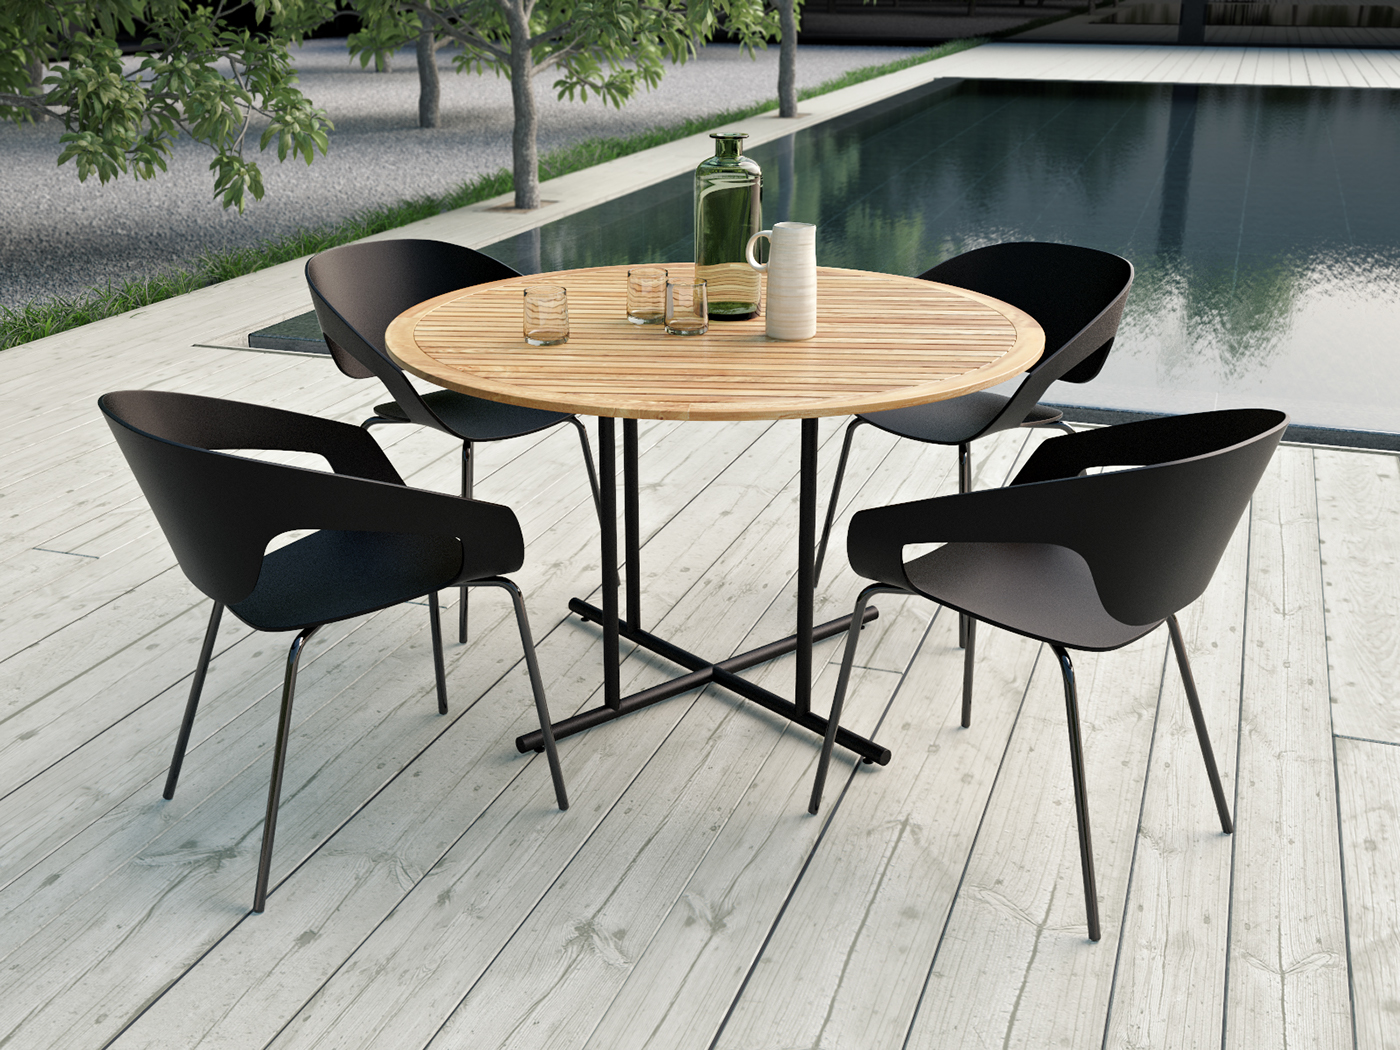 outdoor furniture poolside set Casamania by Frezza Outdoor chair design connected 3d Models CG Content luca nichetto Outdoor Table